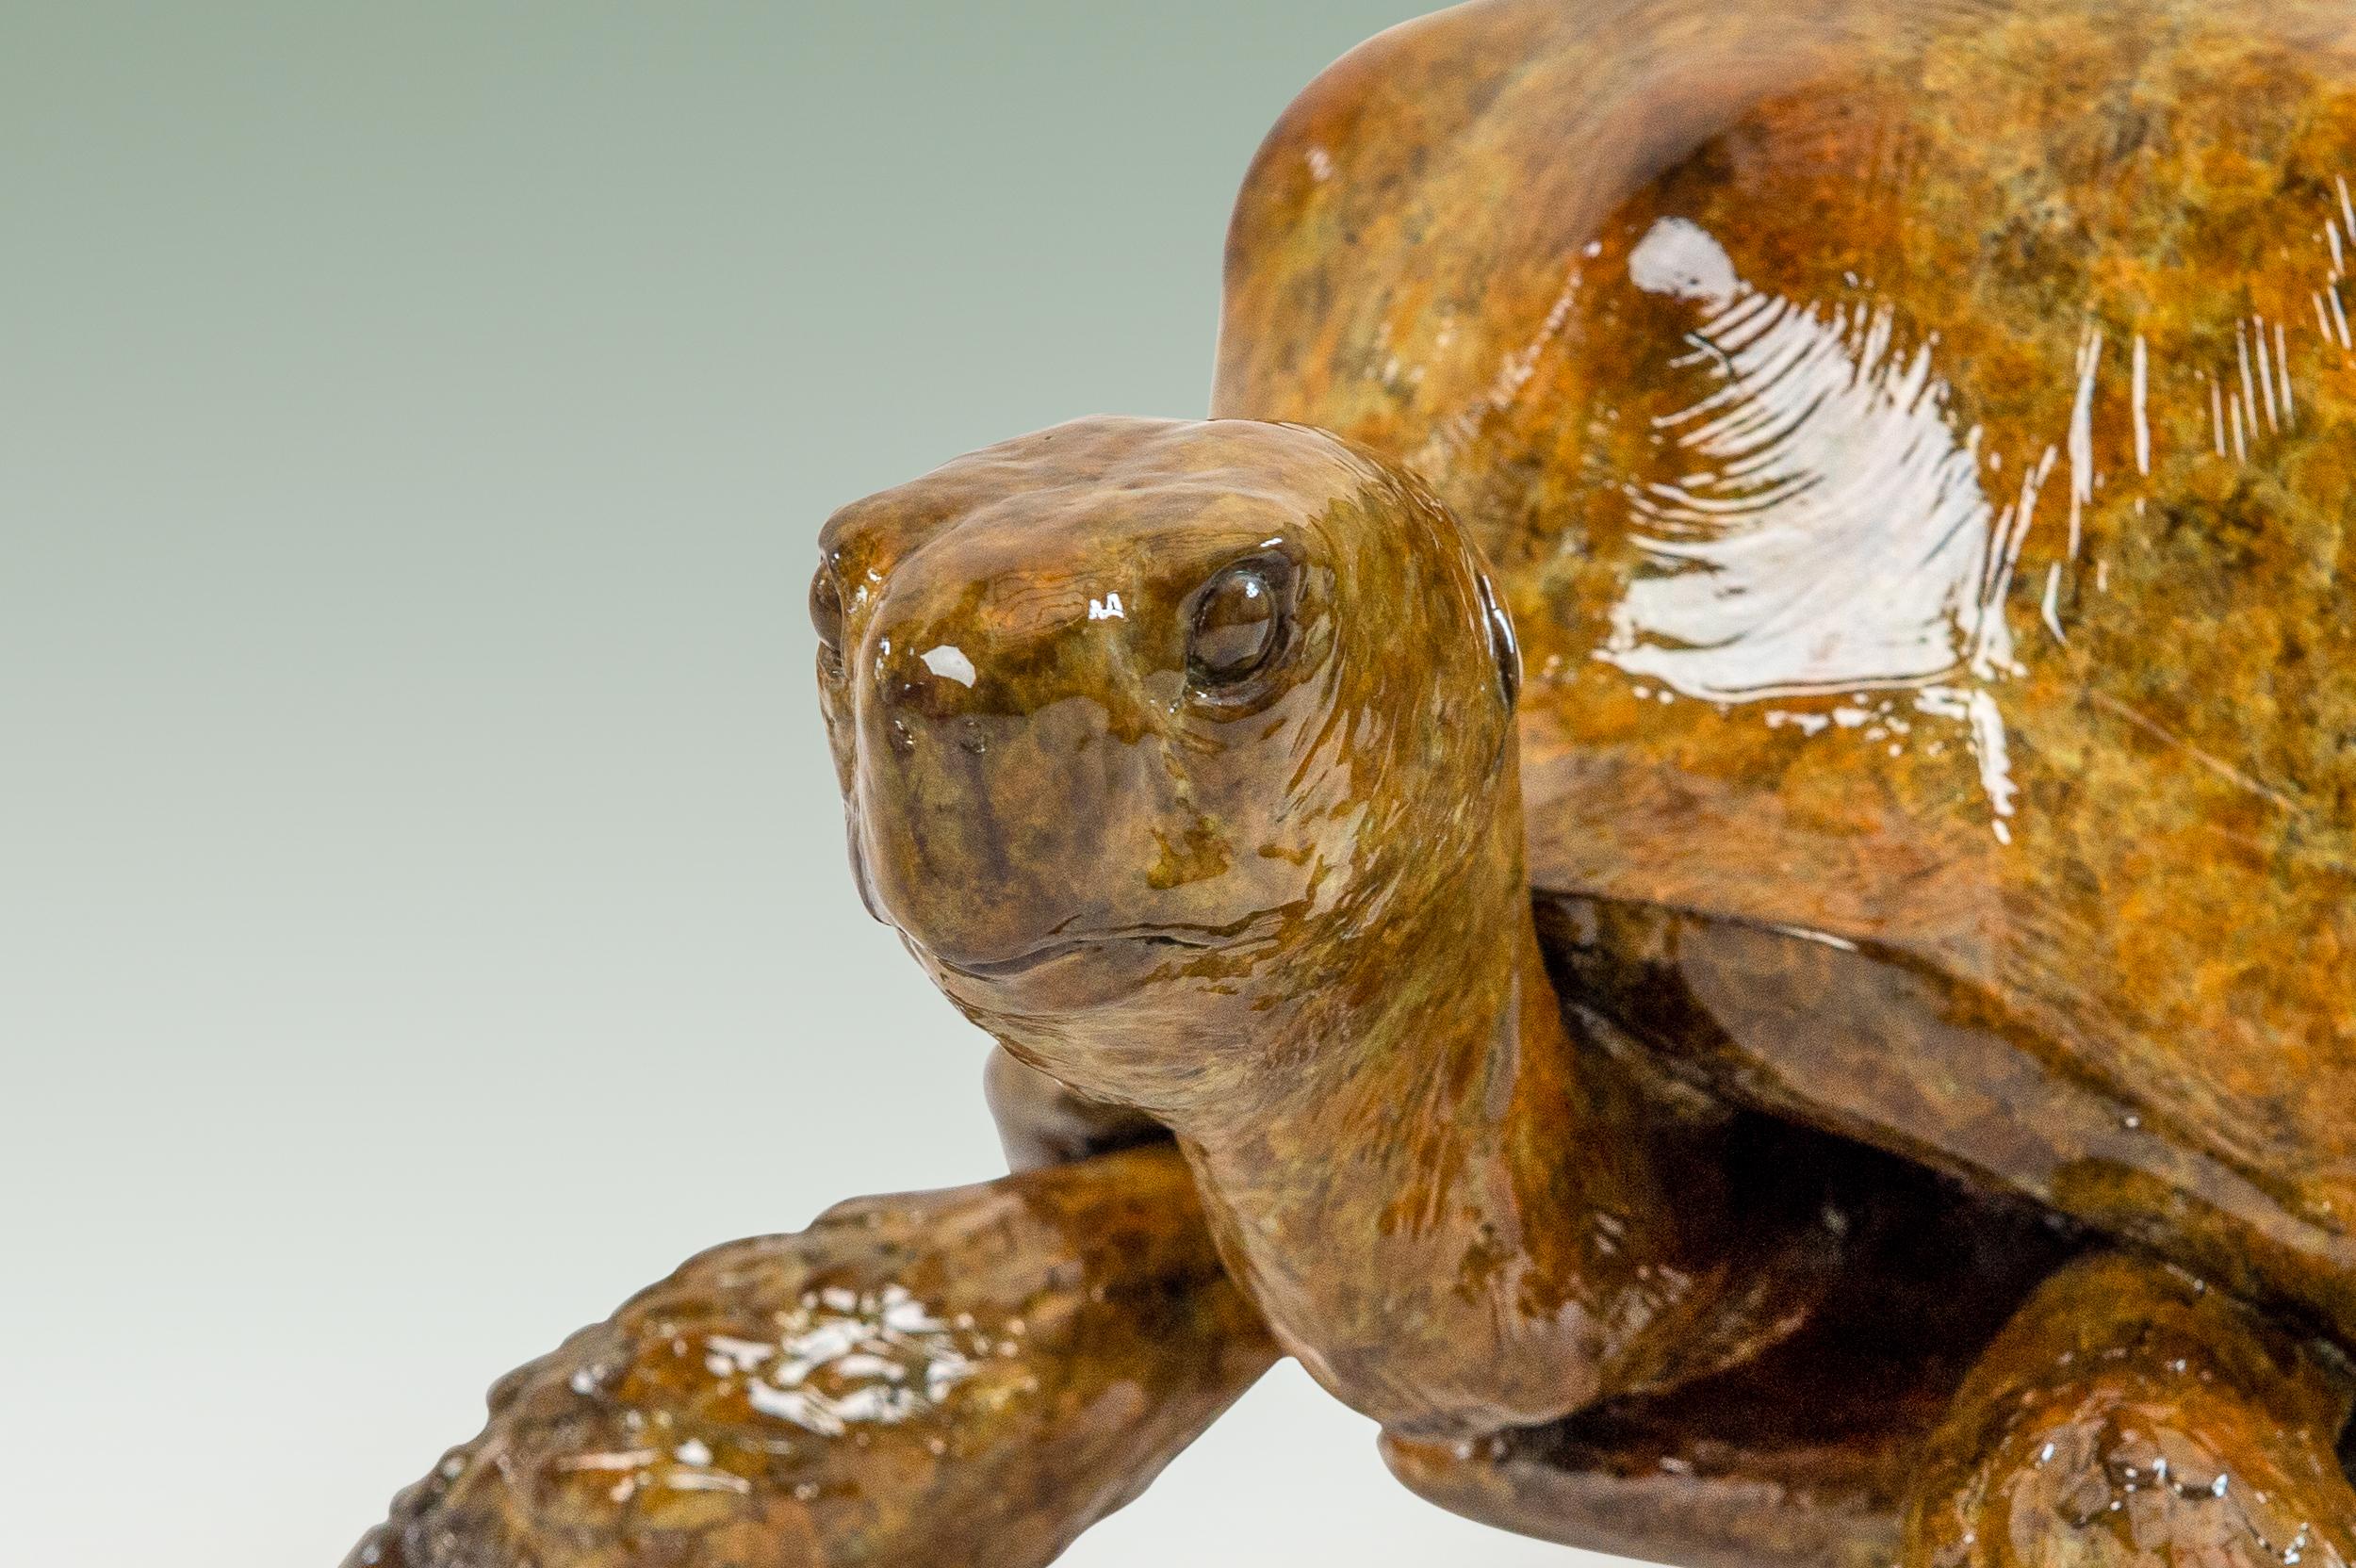 'Tortoise' Contemporary bronze animal sculpture of a tortoise, glossy finish  - Sculpture by Tobias Martin